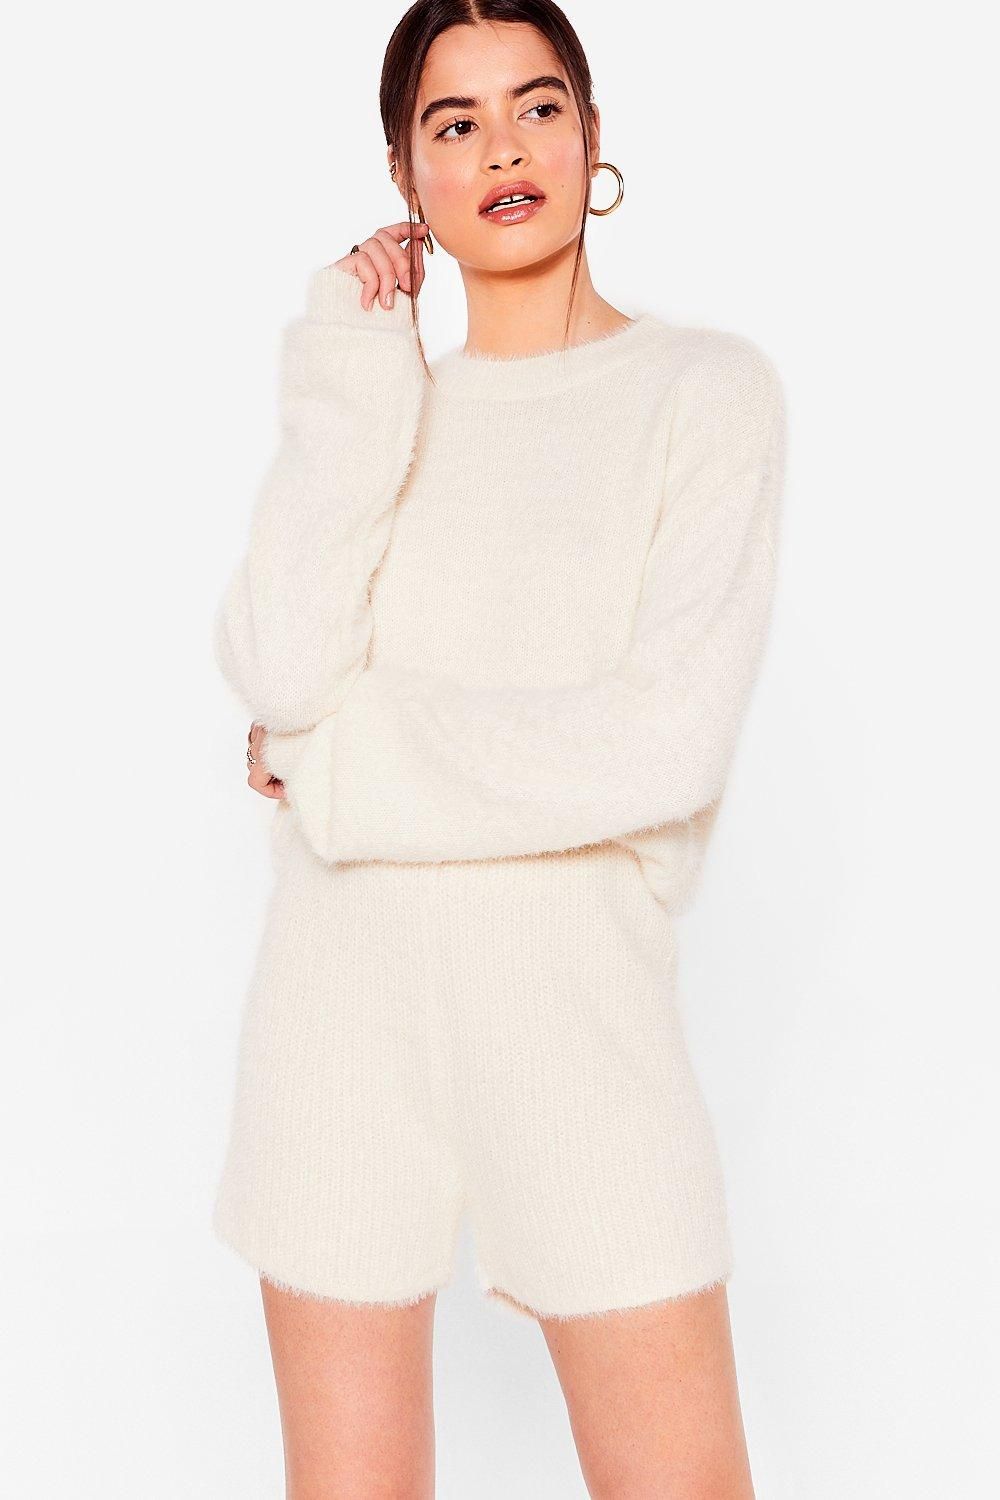 Something About You Knitted Shorts Lounge Set | NastyGal (US & CA)